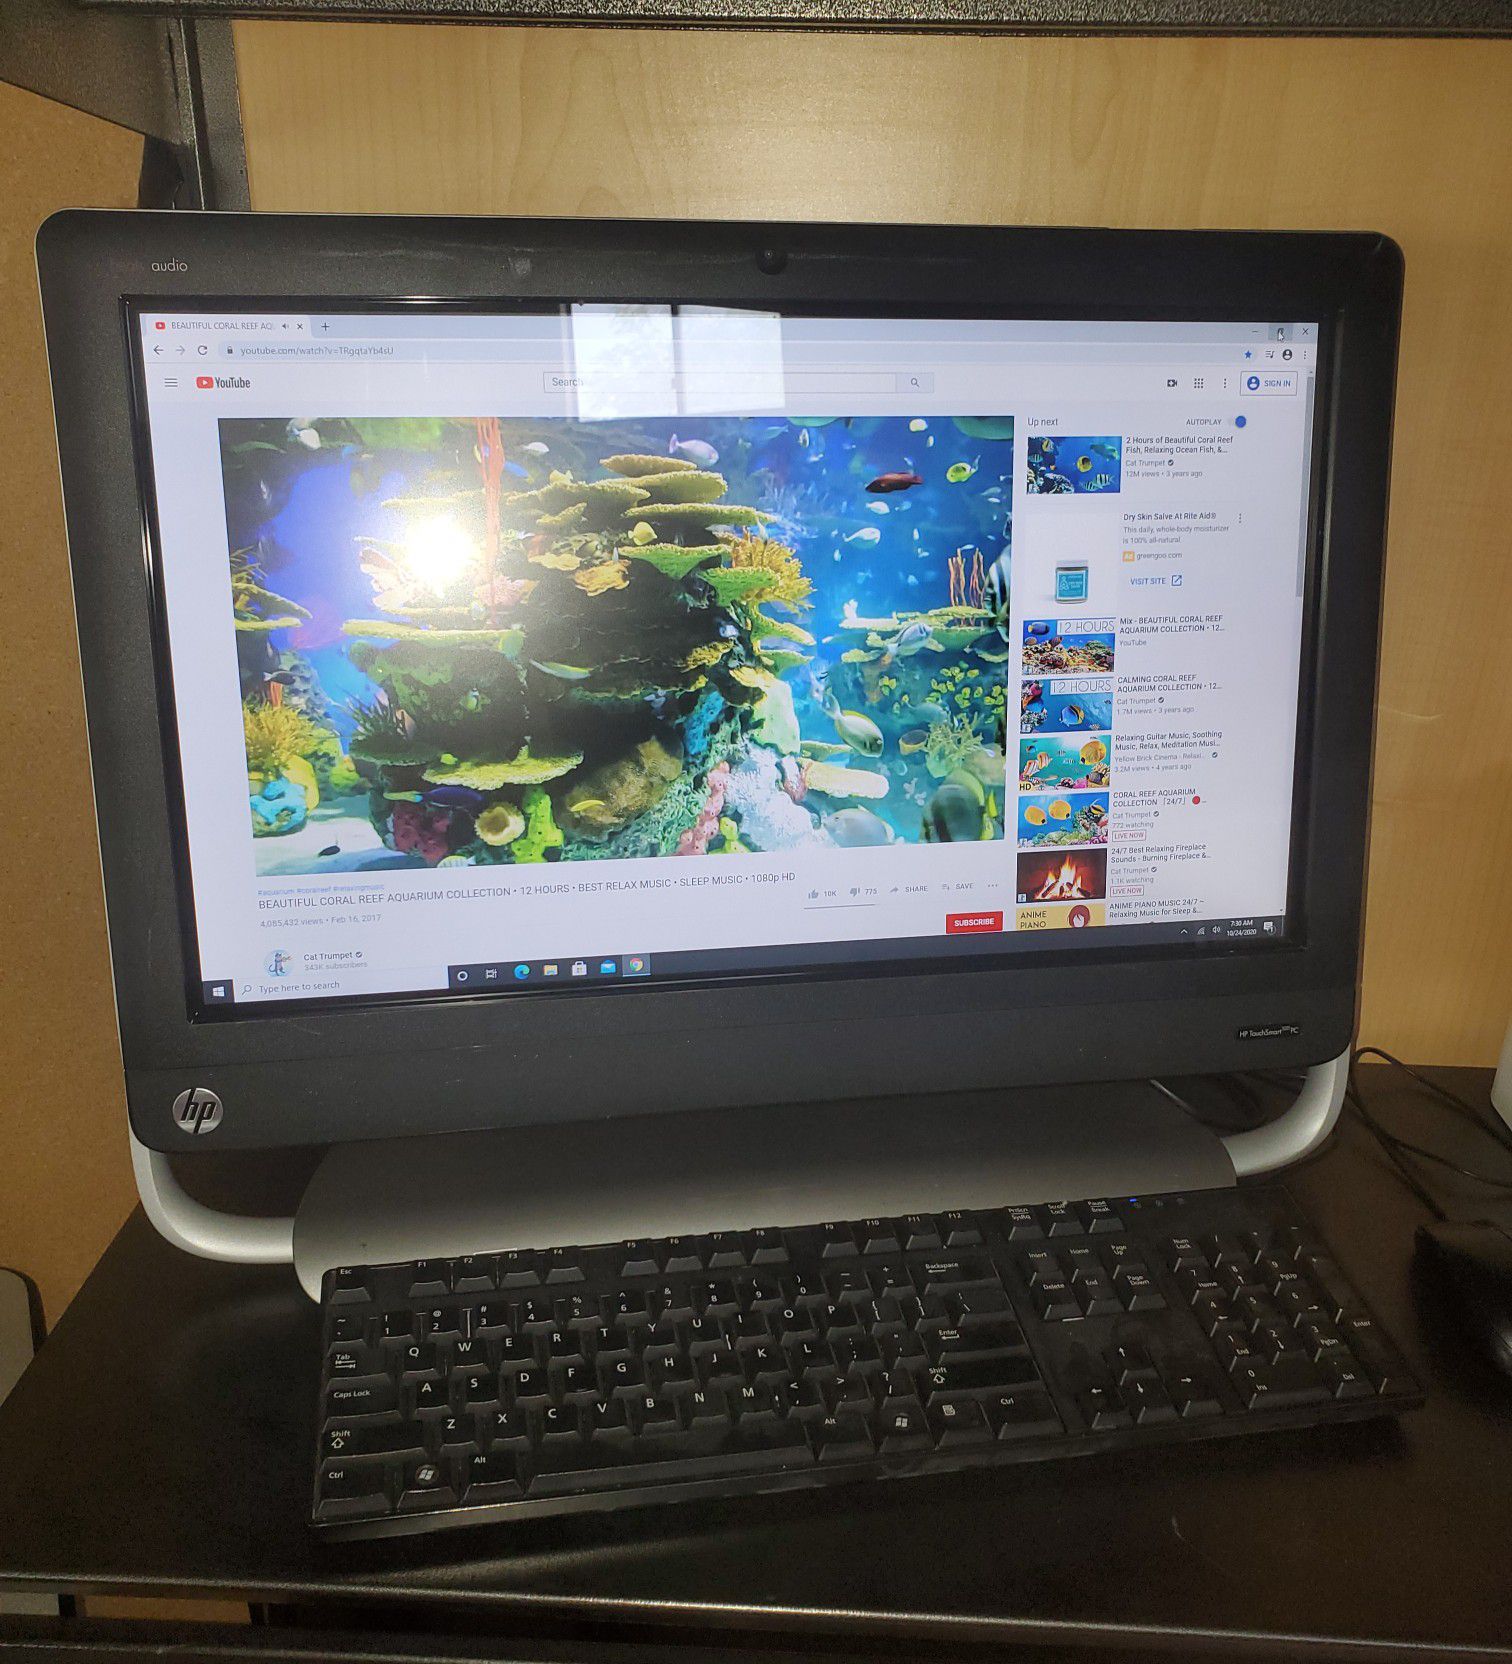 HP touchsmart 530 - 23" touchscreen all in one PC